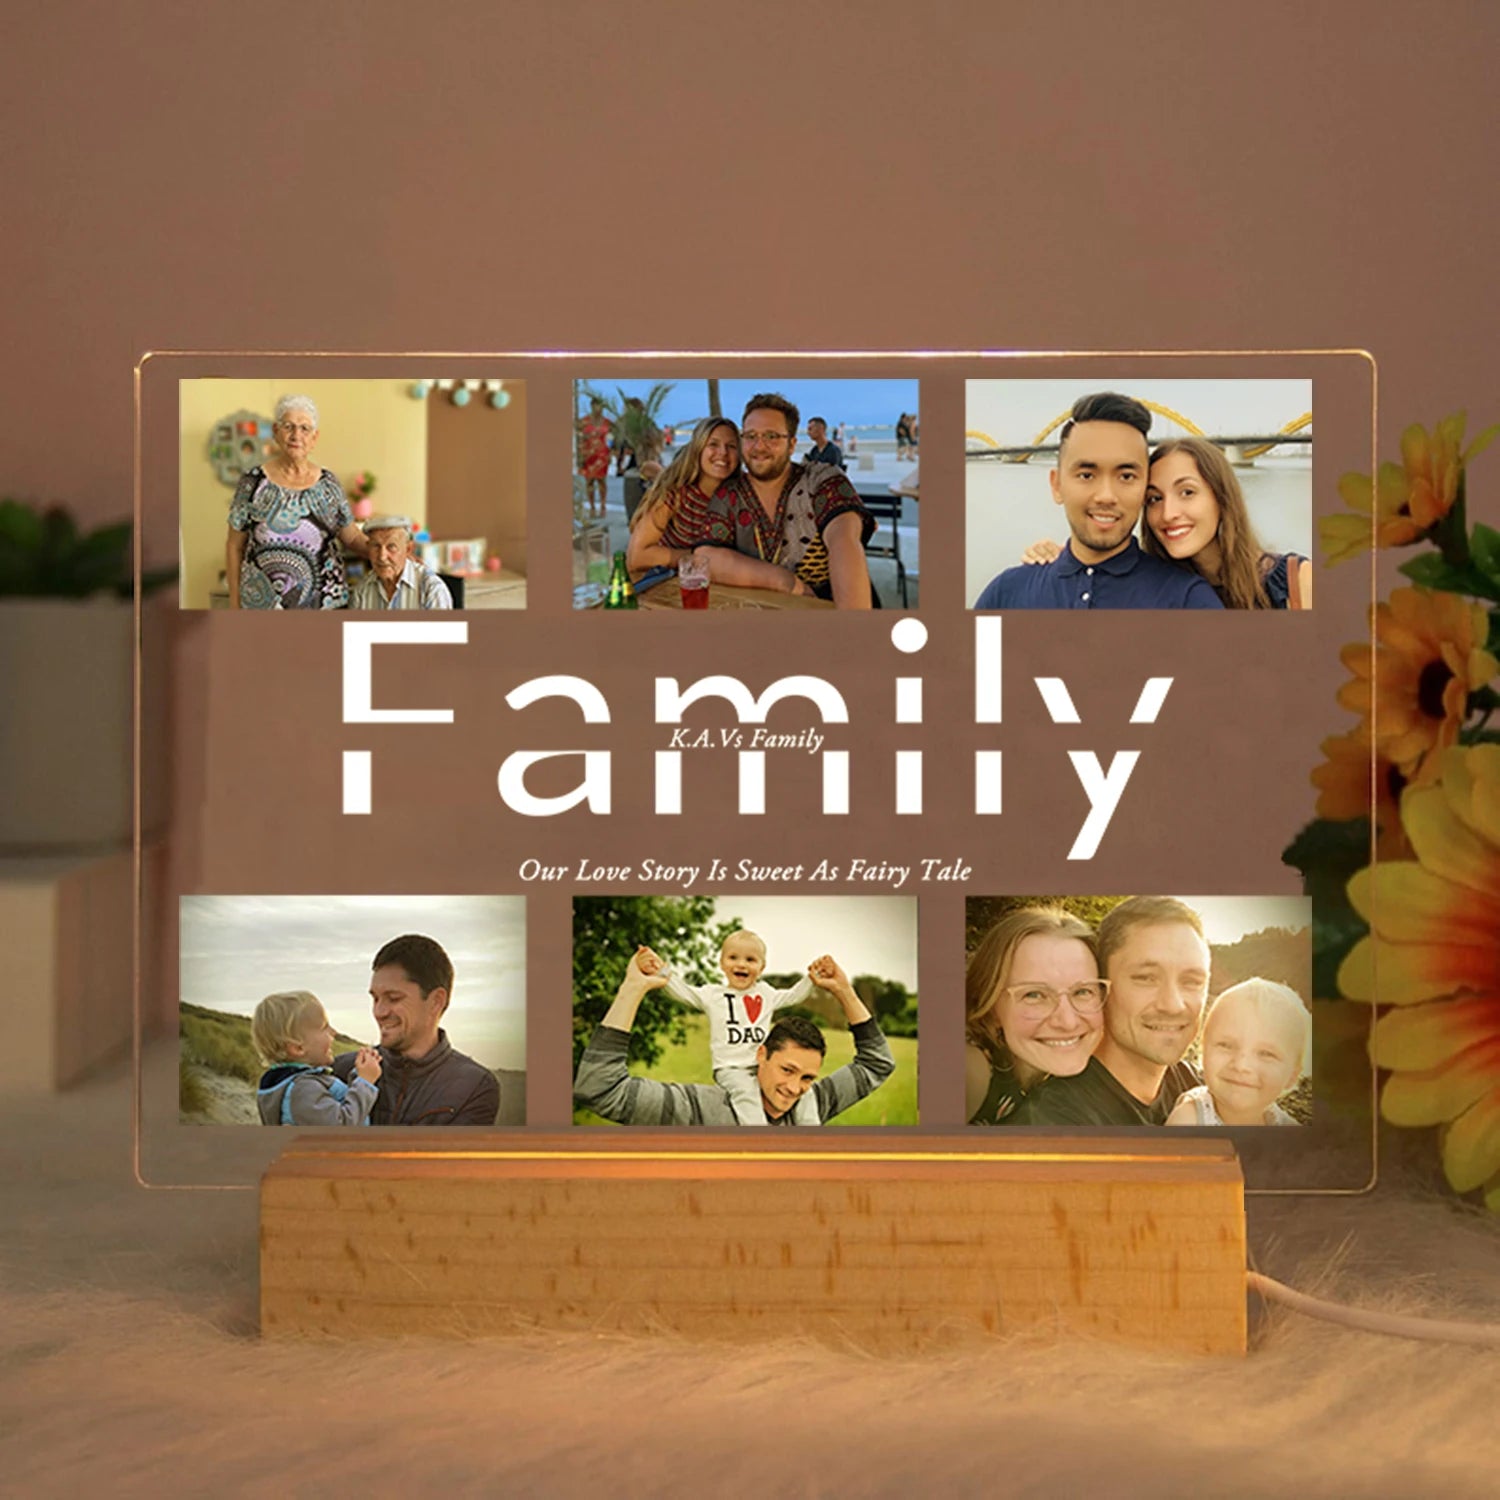 Personalized Acrylic Lamp with Custom Photo and Text - Ideal Bedroom Night Light for MOM DAD LOVE Friend Family Day Wedding Birthday Gift Present Family / Warm Light